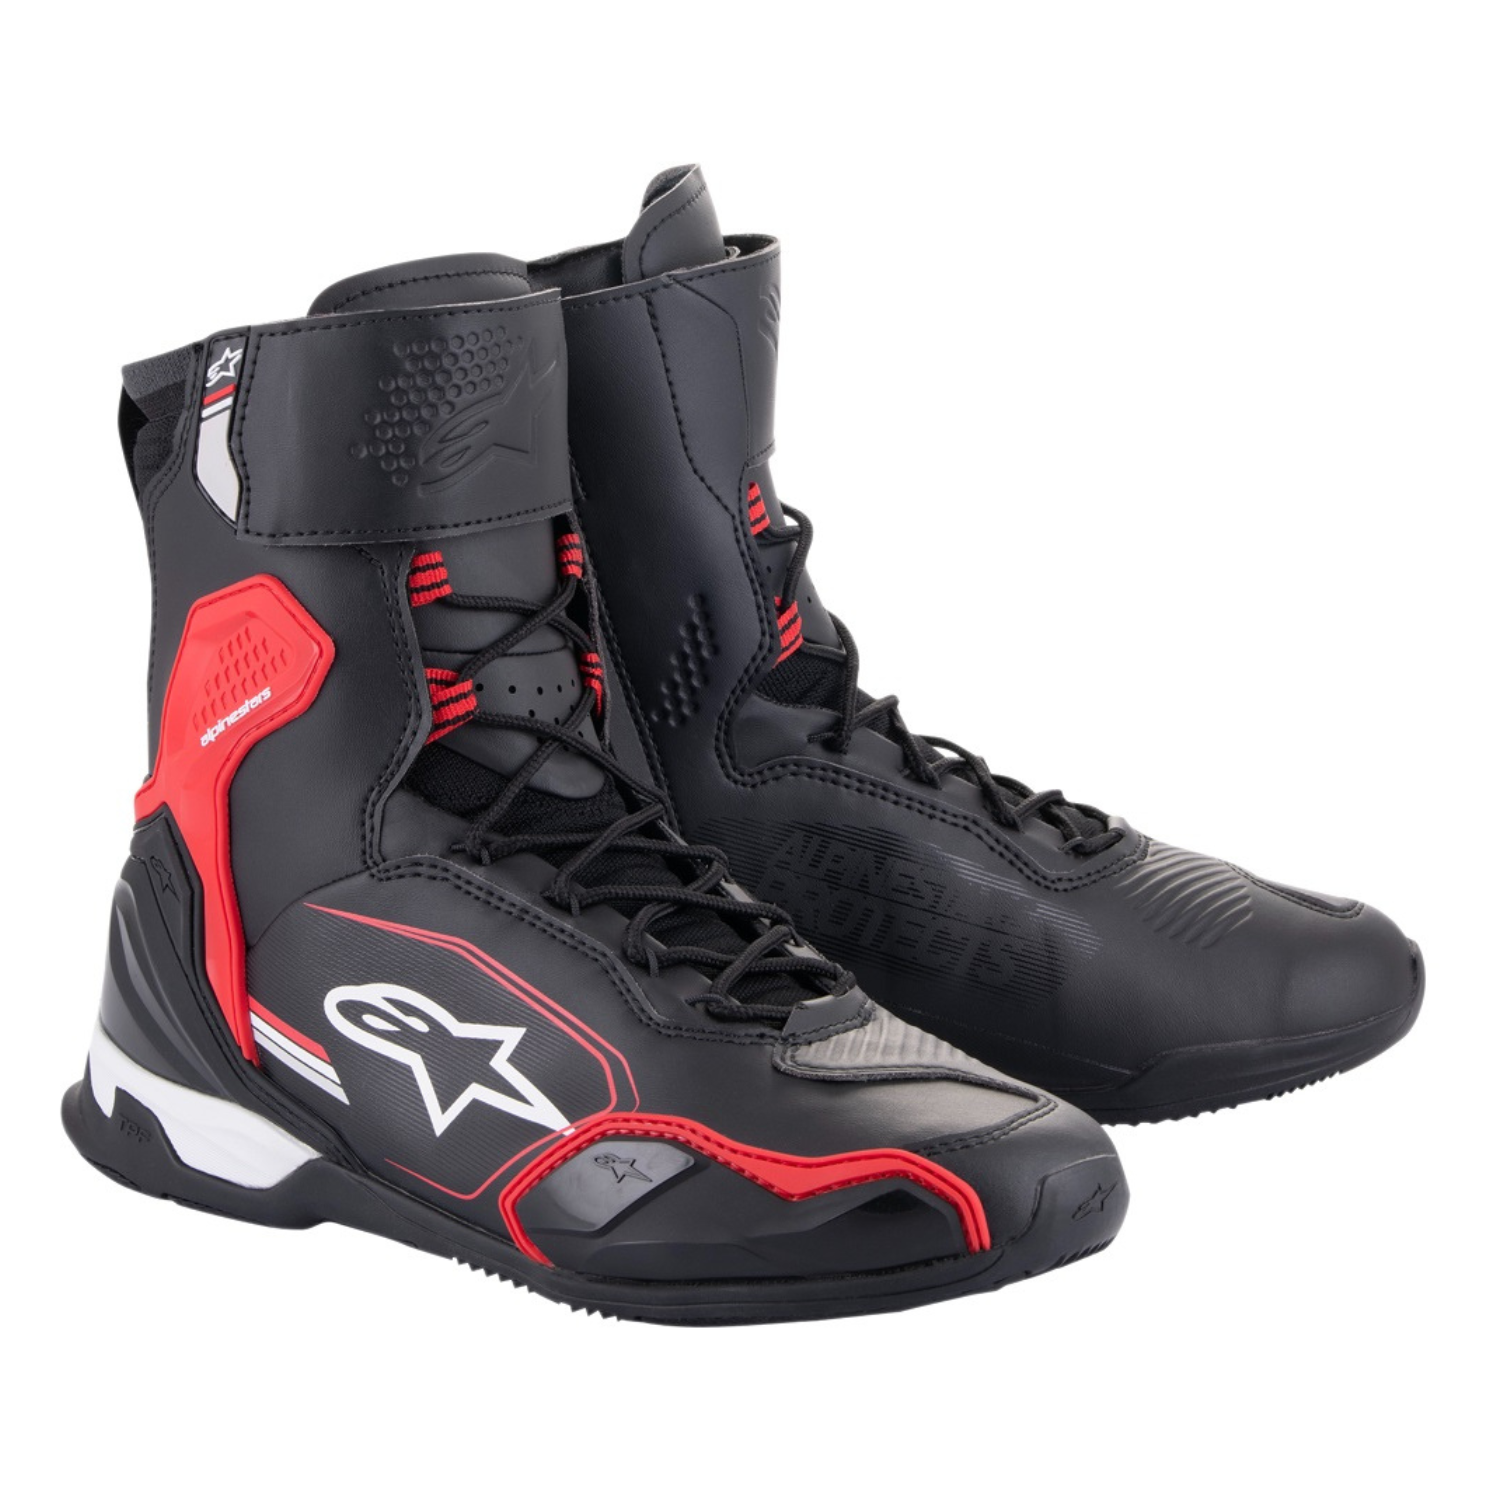 Image of EU Alpinestars Superfaster Shoes Black Bright Red White Taille US 13